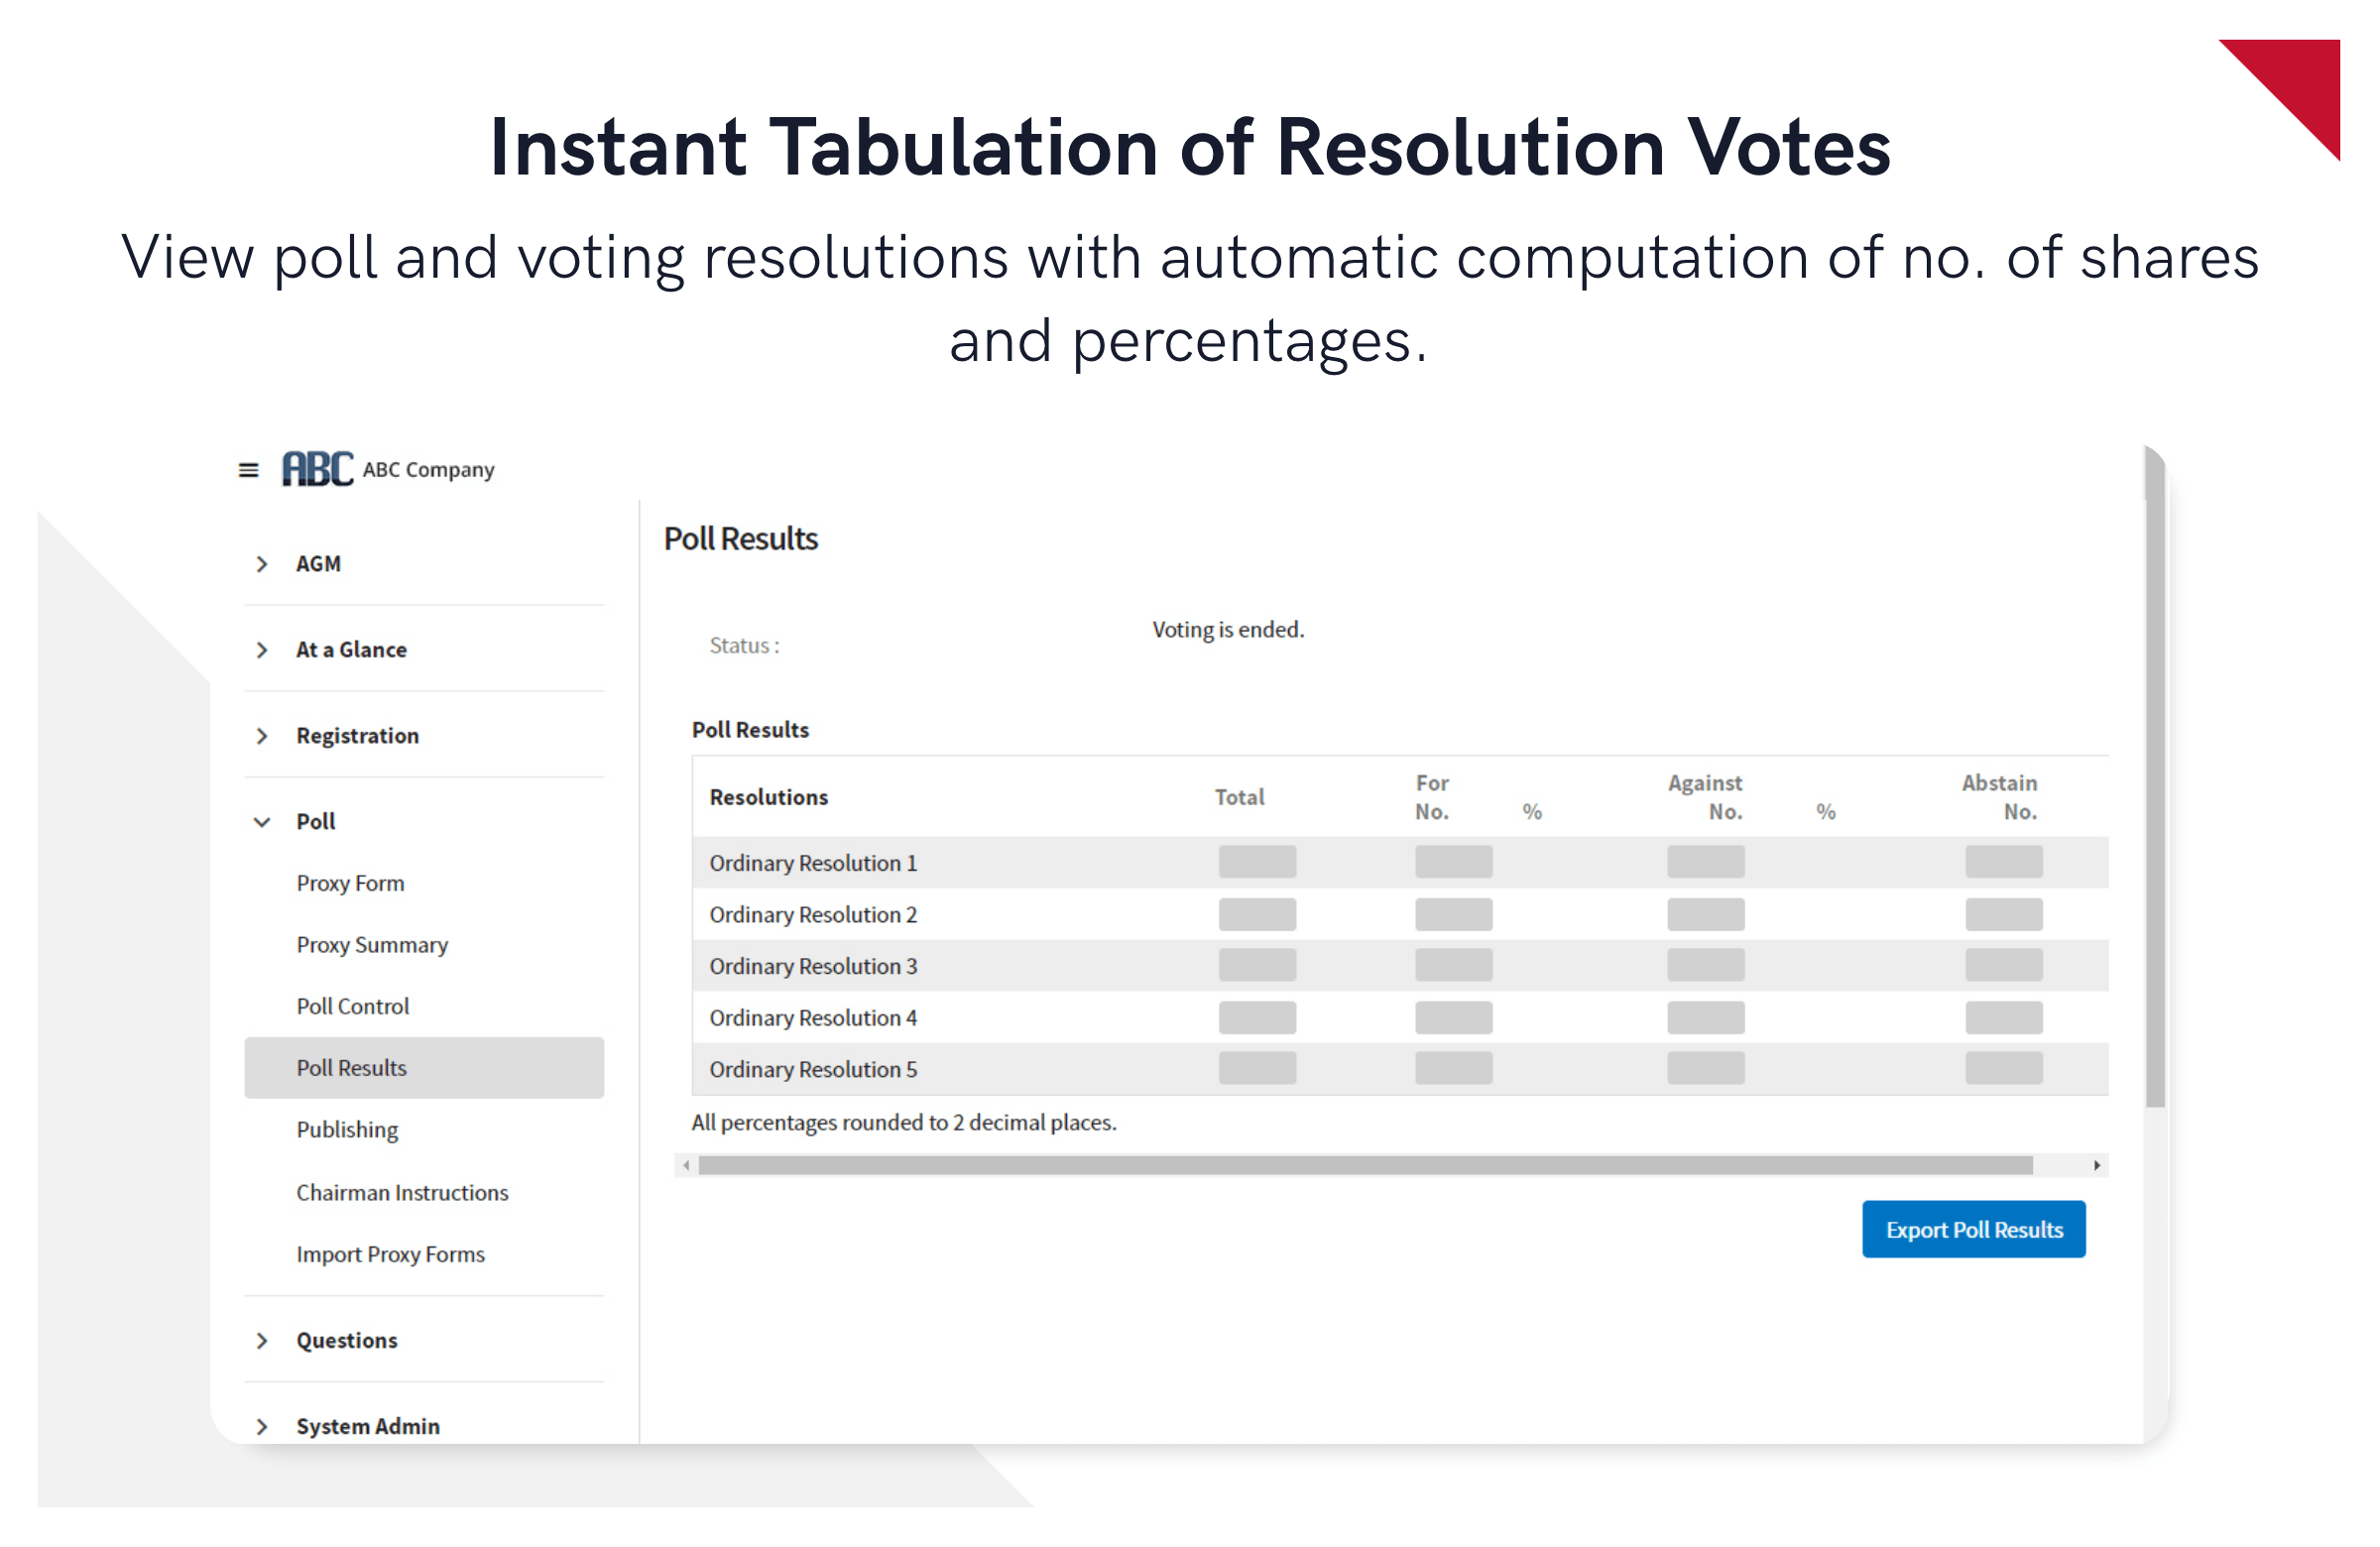 Polling and Tabulation of Resolution Votes